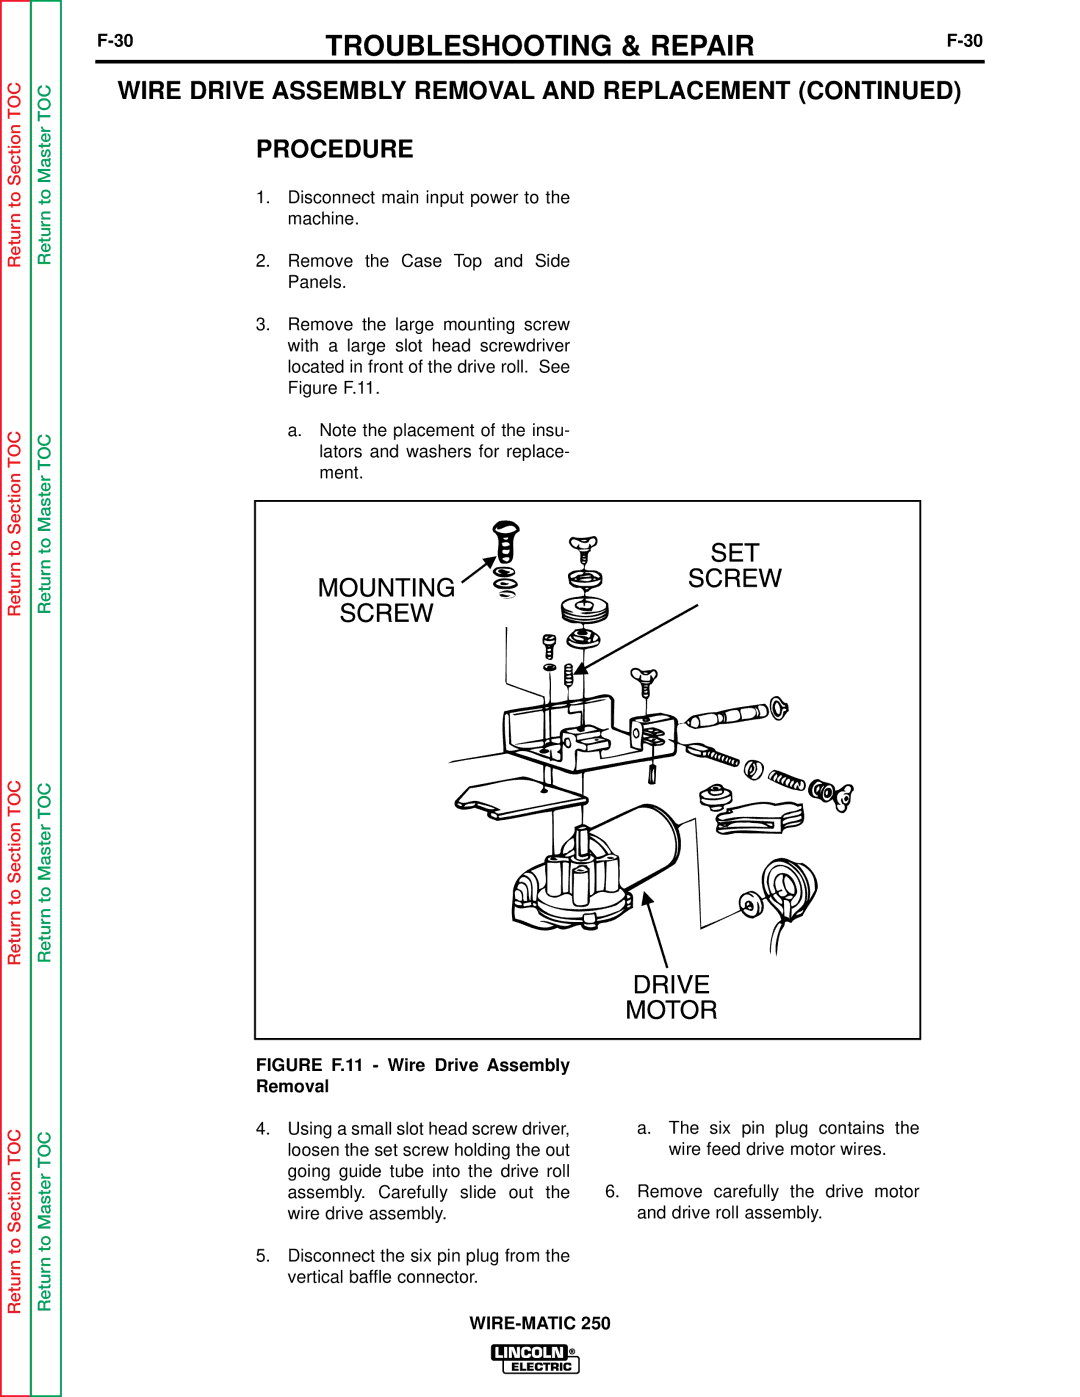 Lincoln Electric SVM 117-A Wire Drive Assembly Removal and Replacement Procedure, Figure F.11 Wire Drive Assembly Removal 